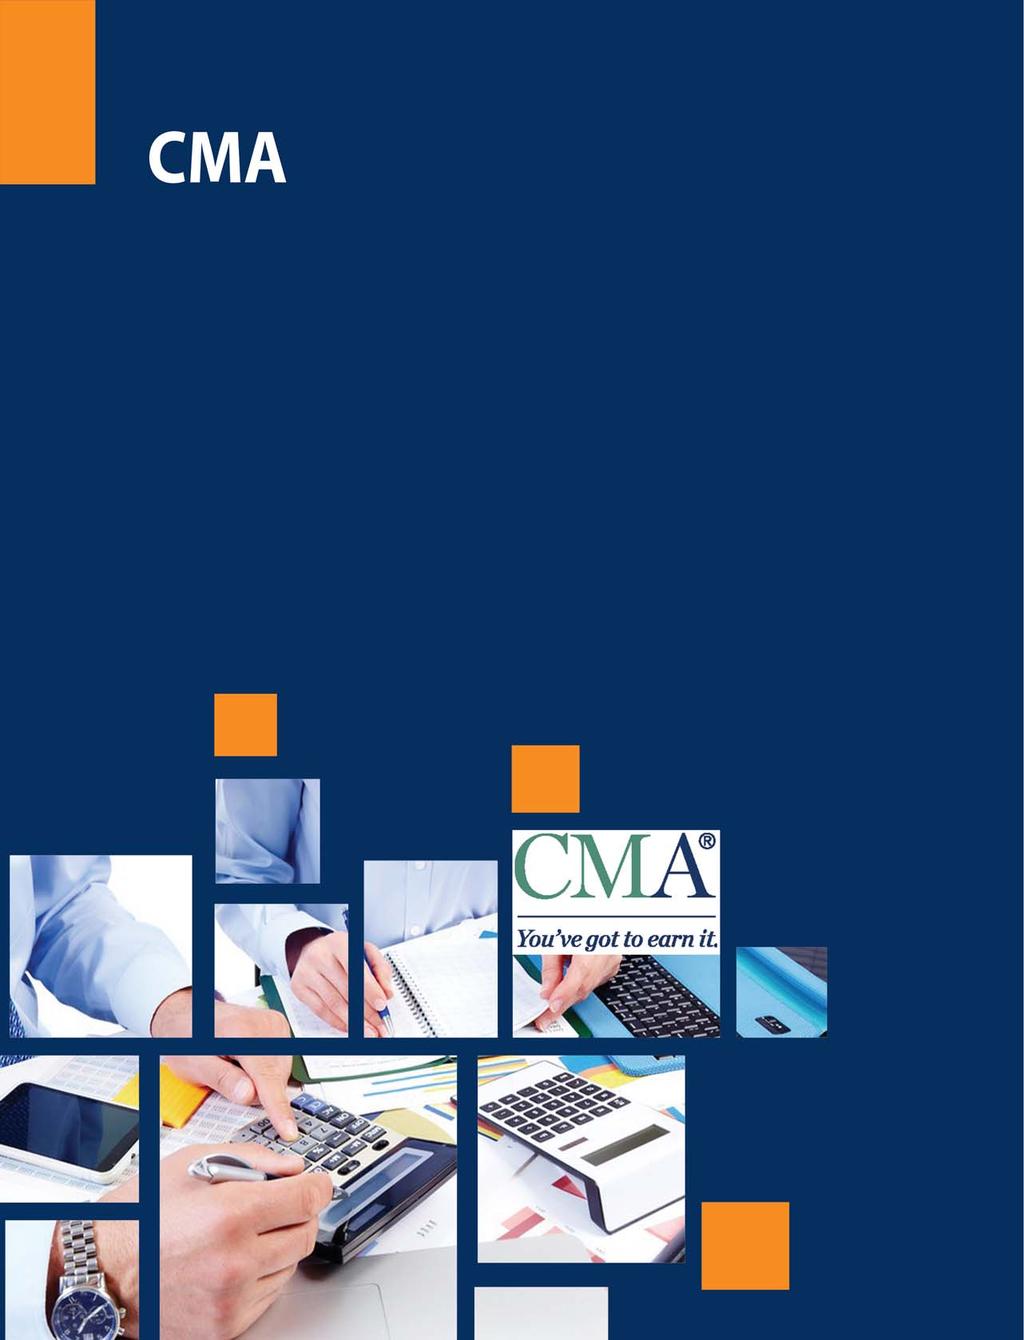 CMA (Certified Management Accountant) Certification from Institute of Management Accountants, USA is a global benchmark for accountants and finance professionals in business.